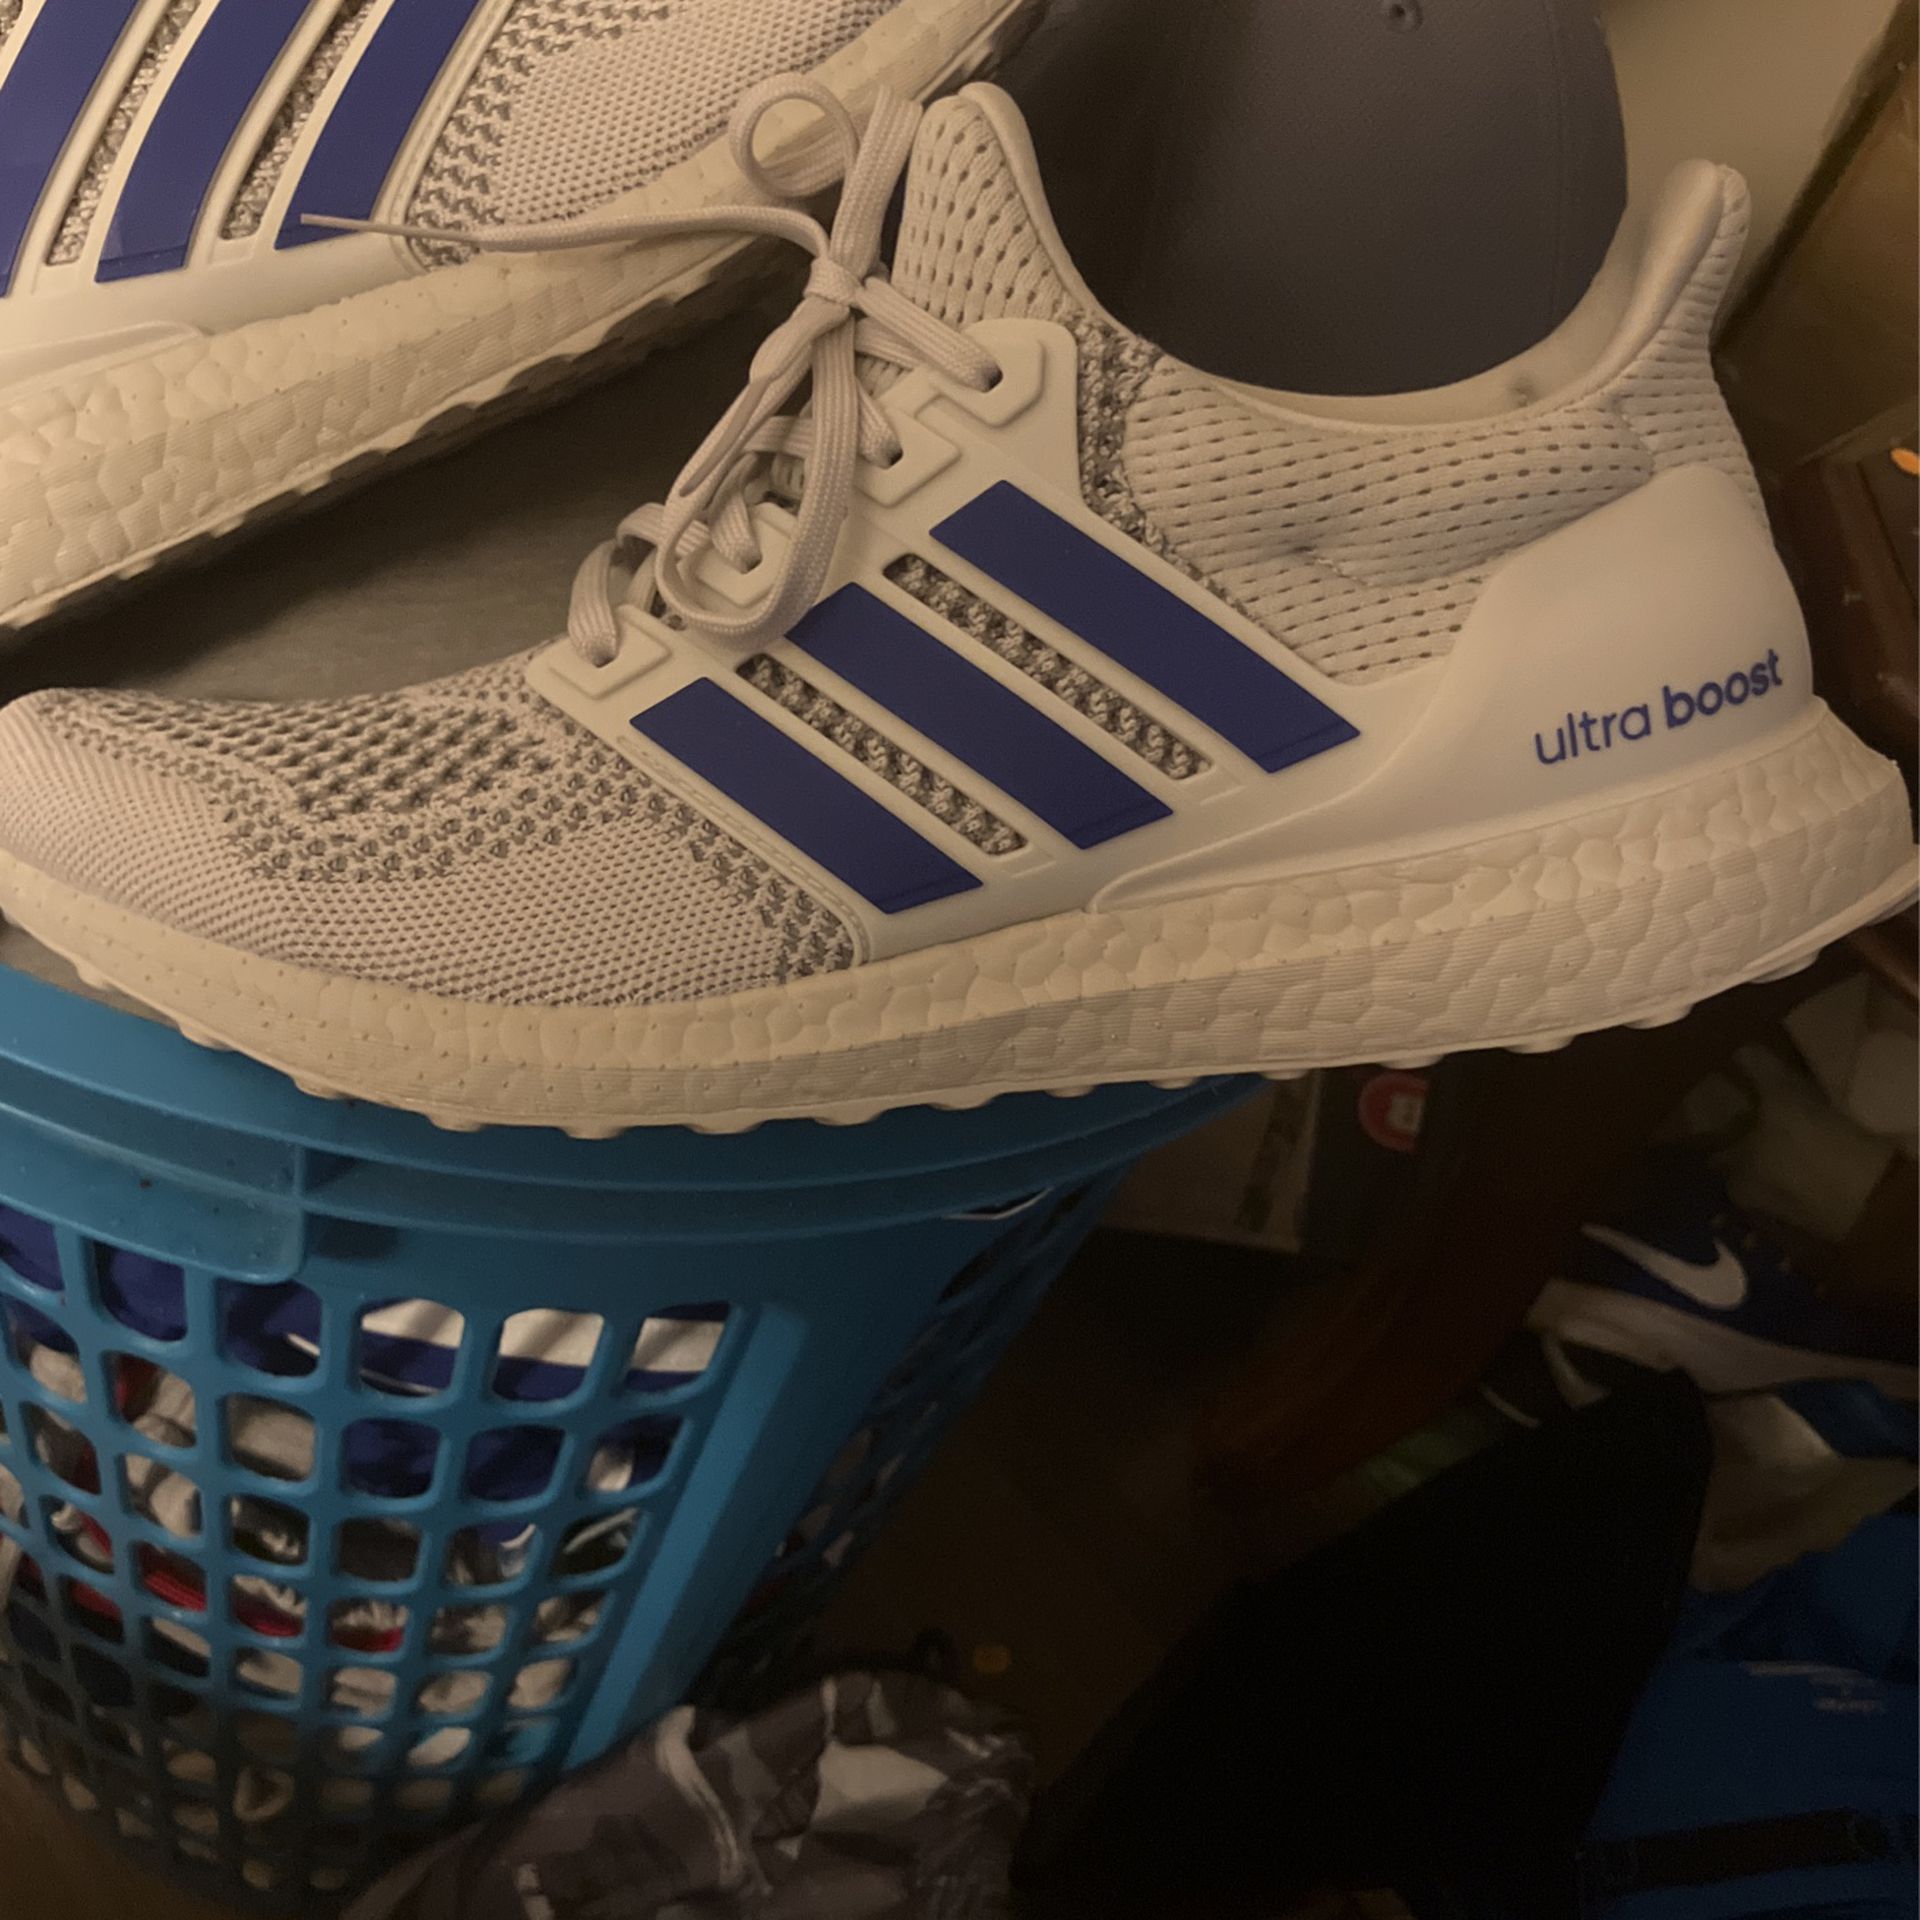 New Adidas Ultra Boost Worn 1 Time. Size 10